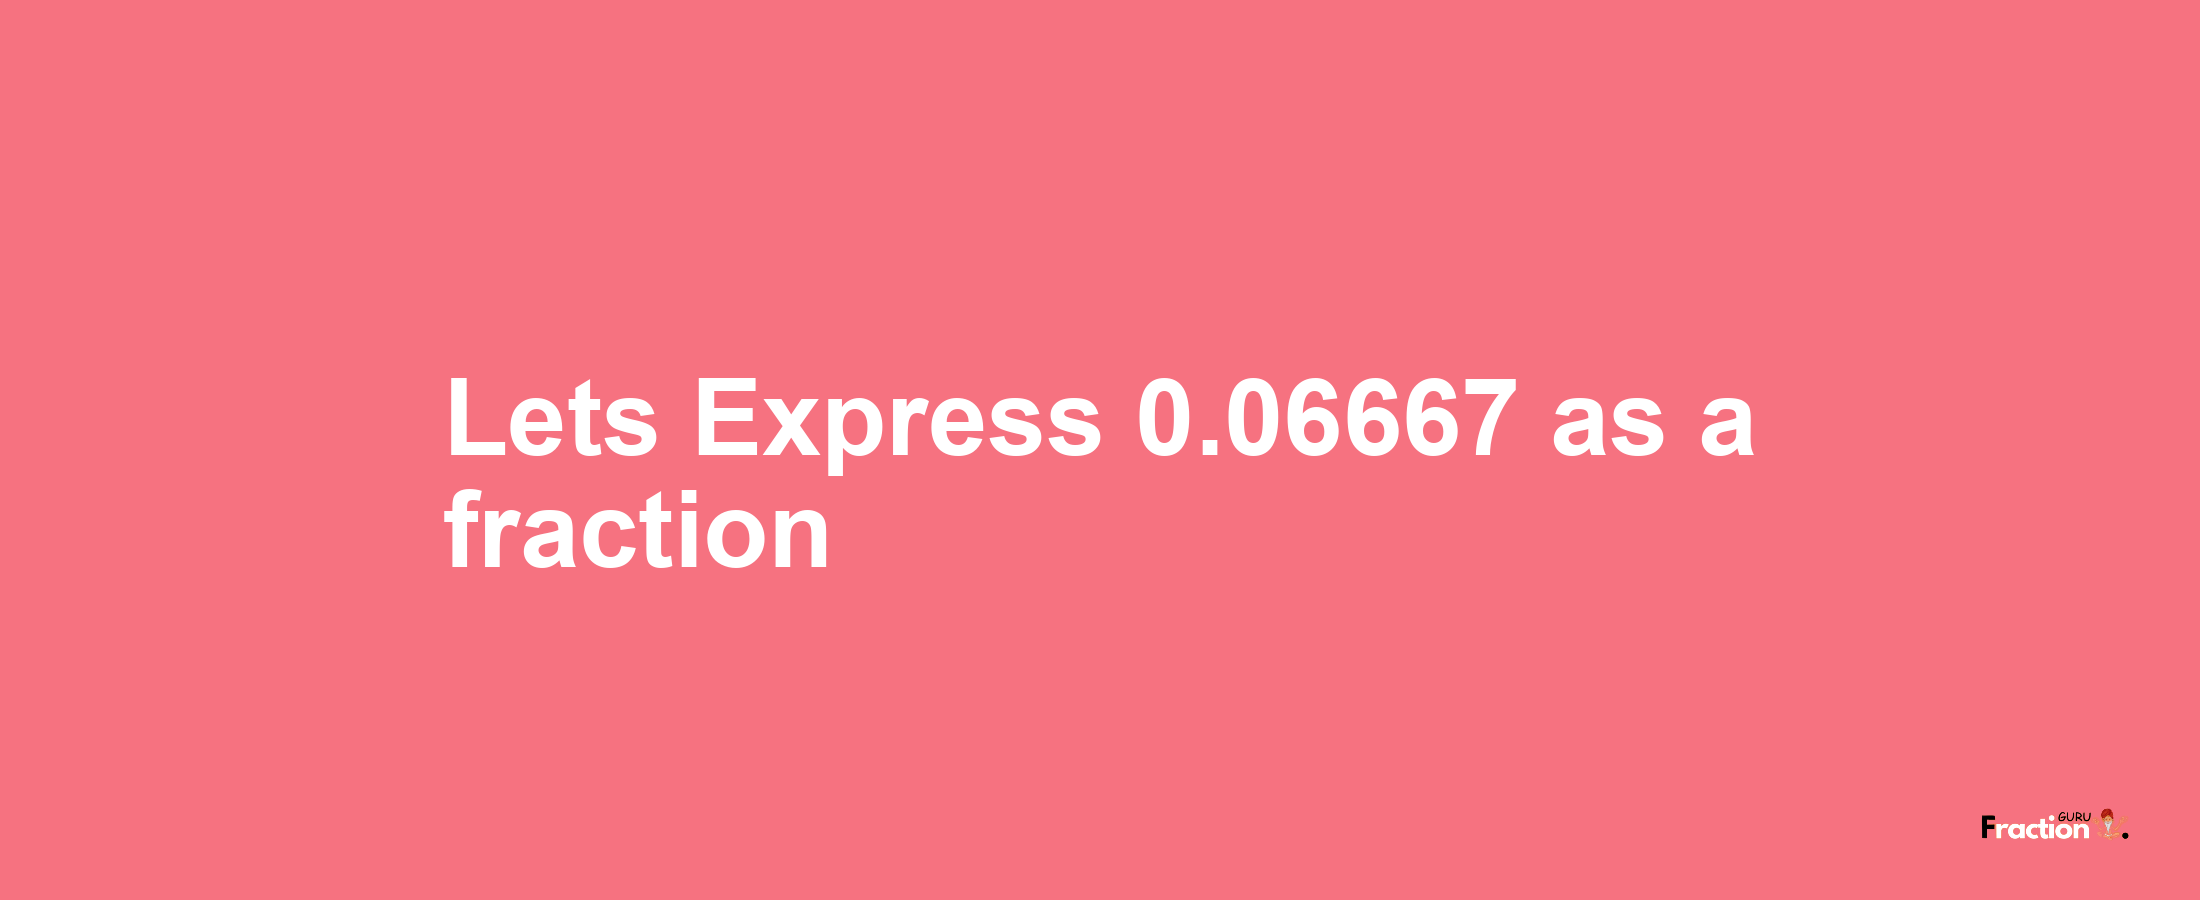 Lets Express 0.06667 as afraction